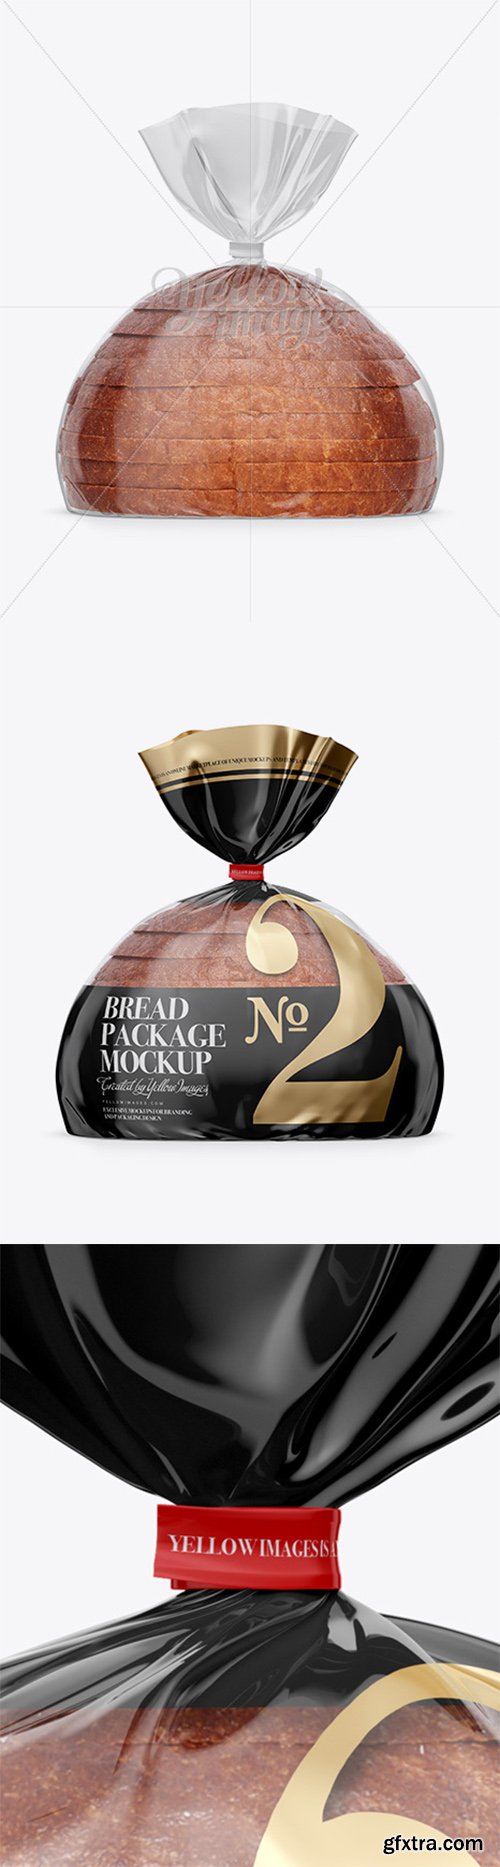 Bag W/ Sliced Bread Mockup - Front View 17921